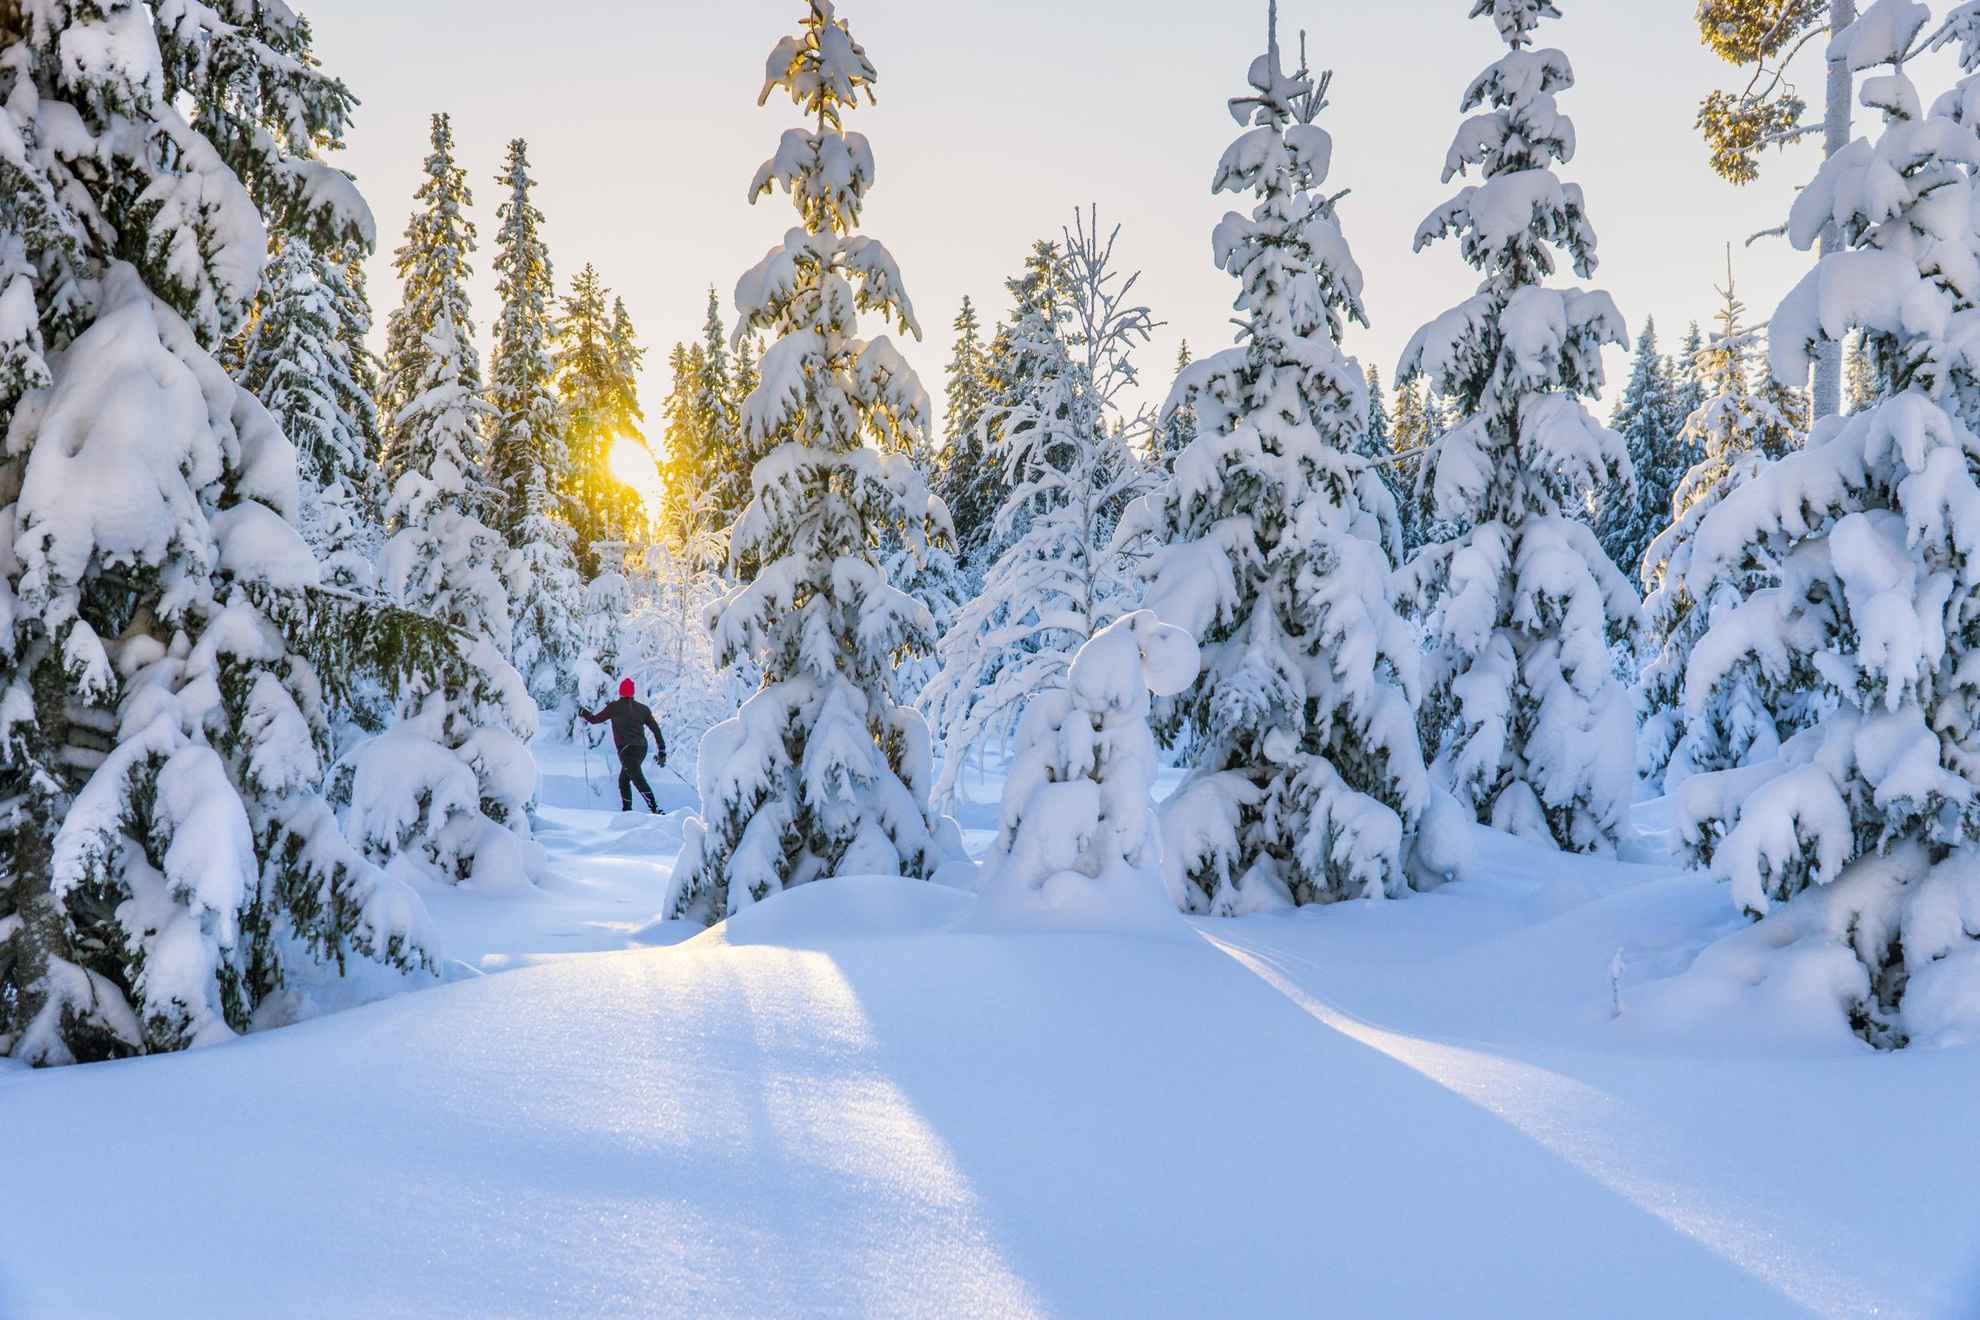 A forest with snow-covered spruces and pine trees. A person is cross-country skiing and the sun shines through the trees.